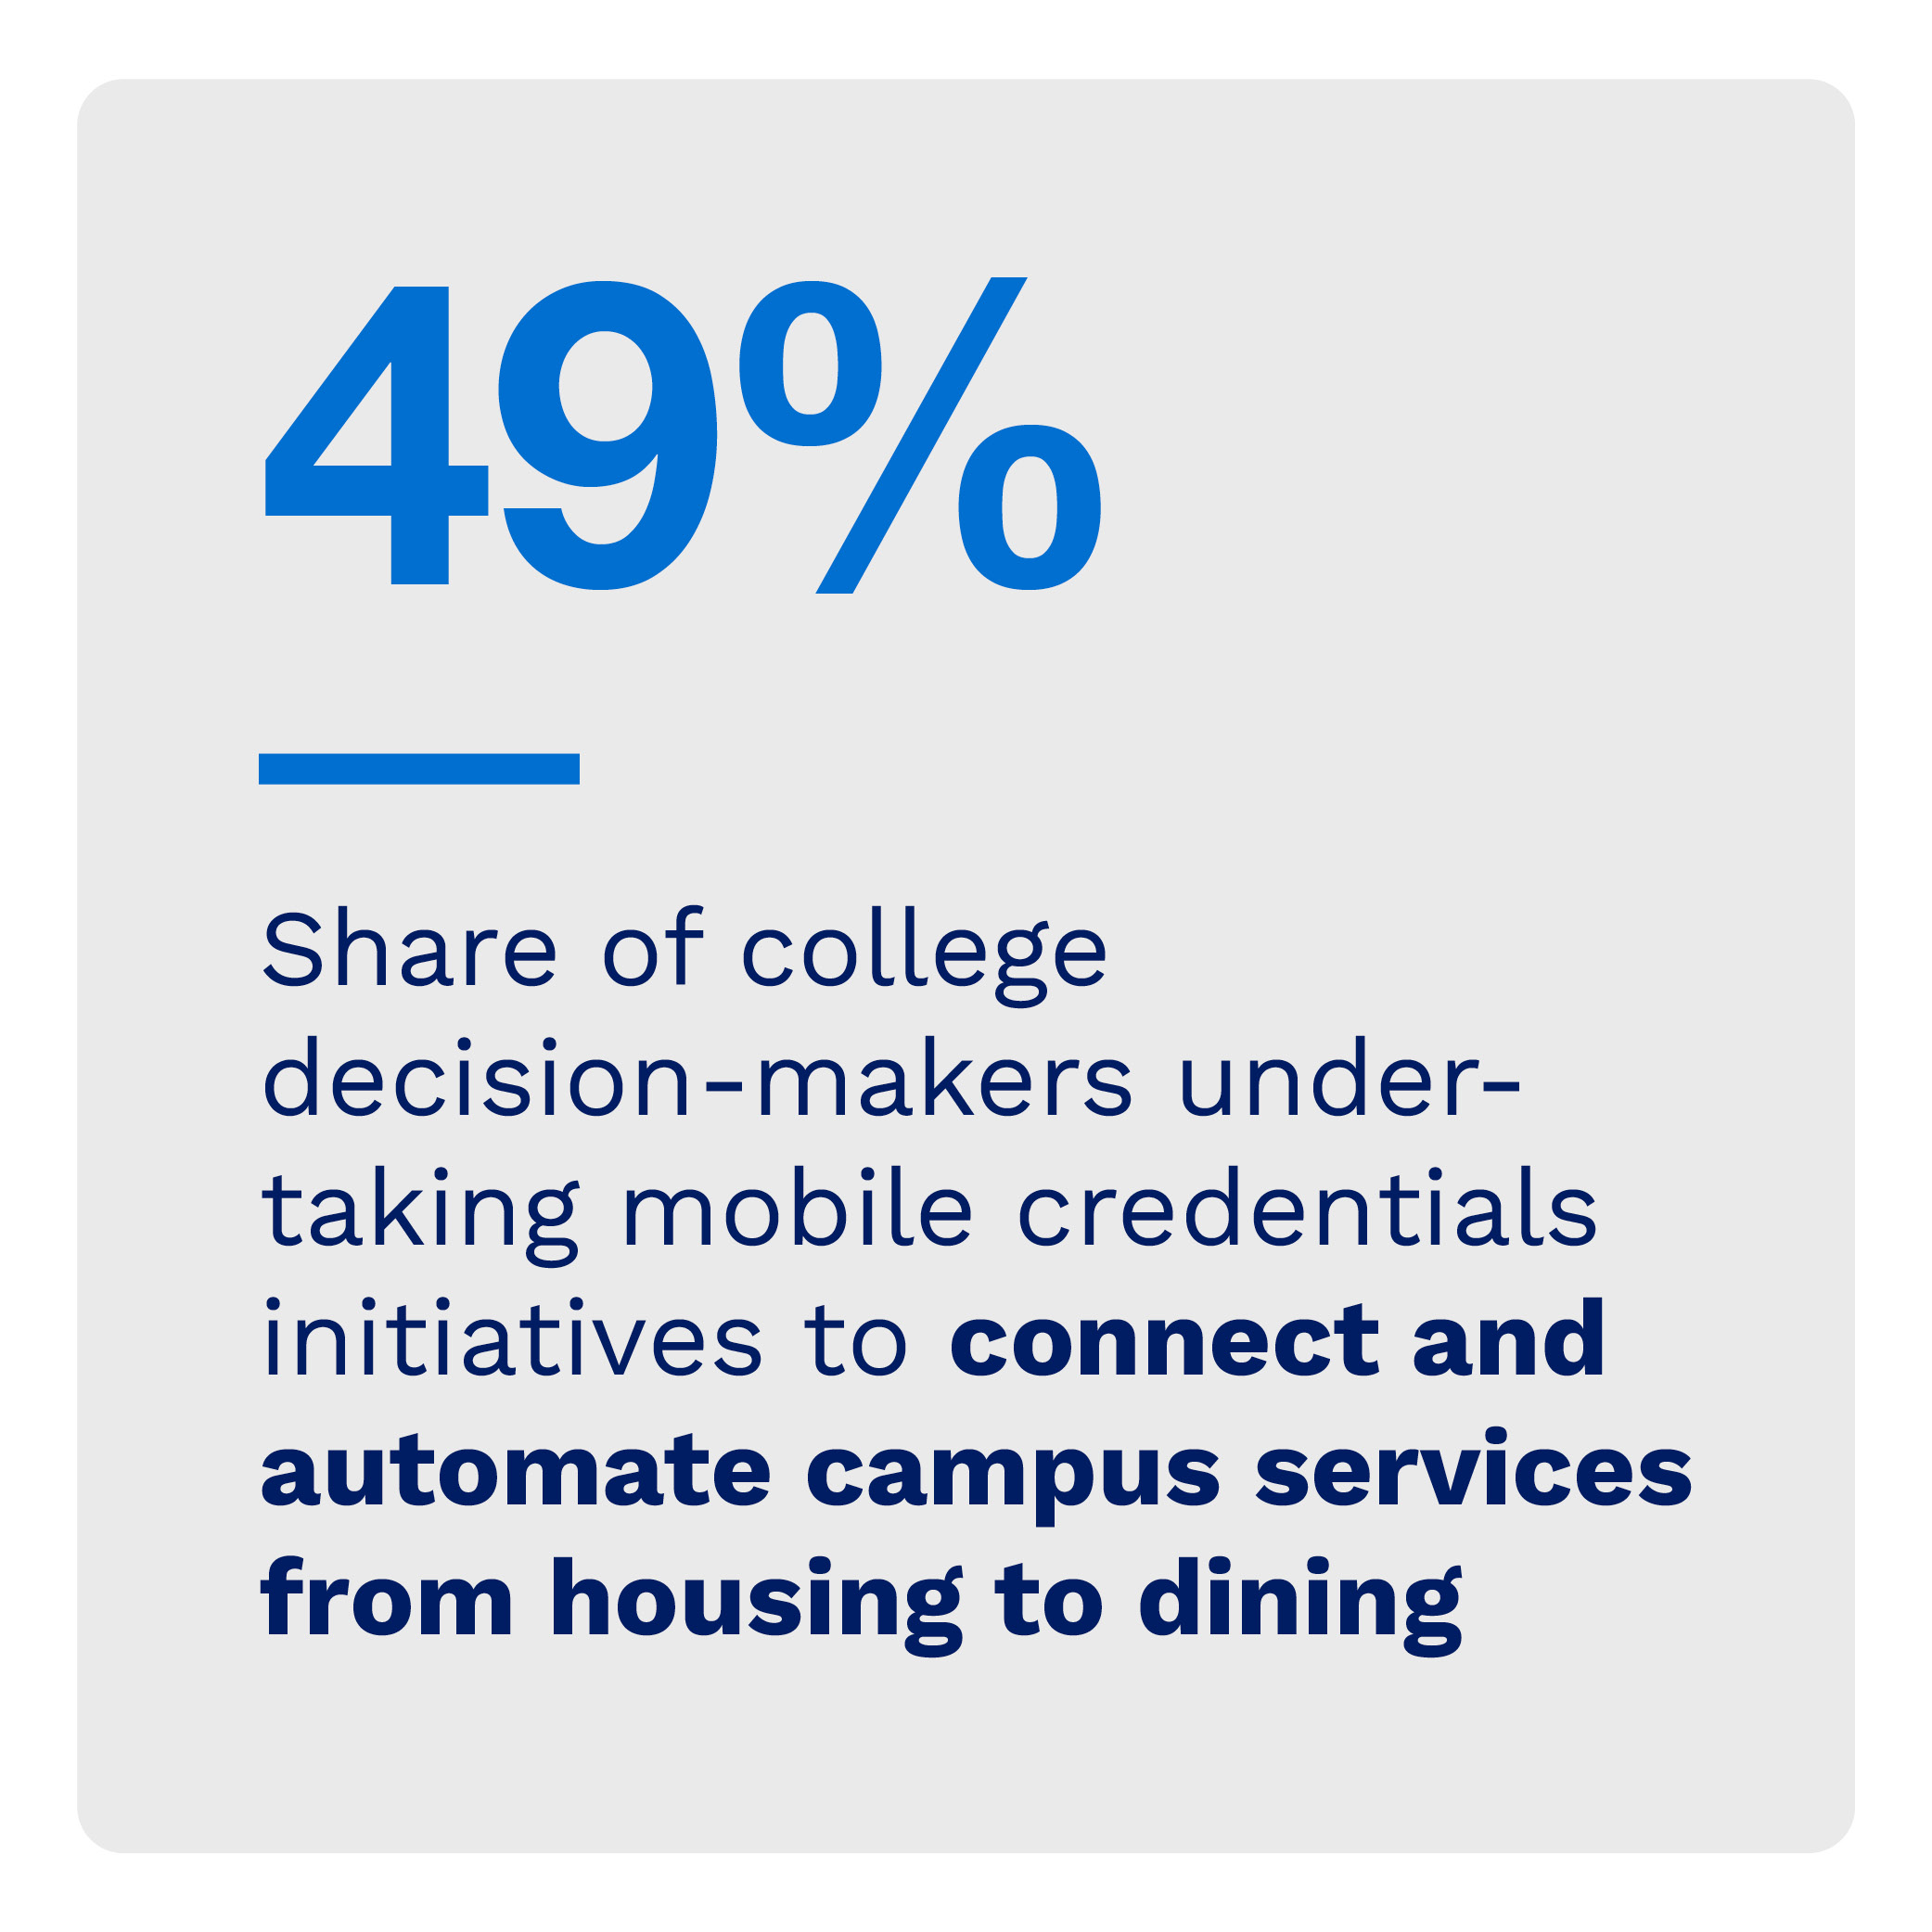 49%: Share of college decision-makers undertaking mobile credentials initiatives to connect and automate campus services from housing to dining